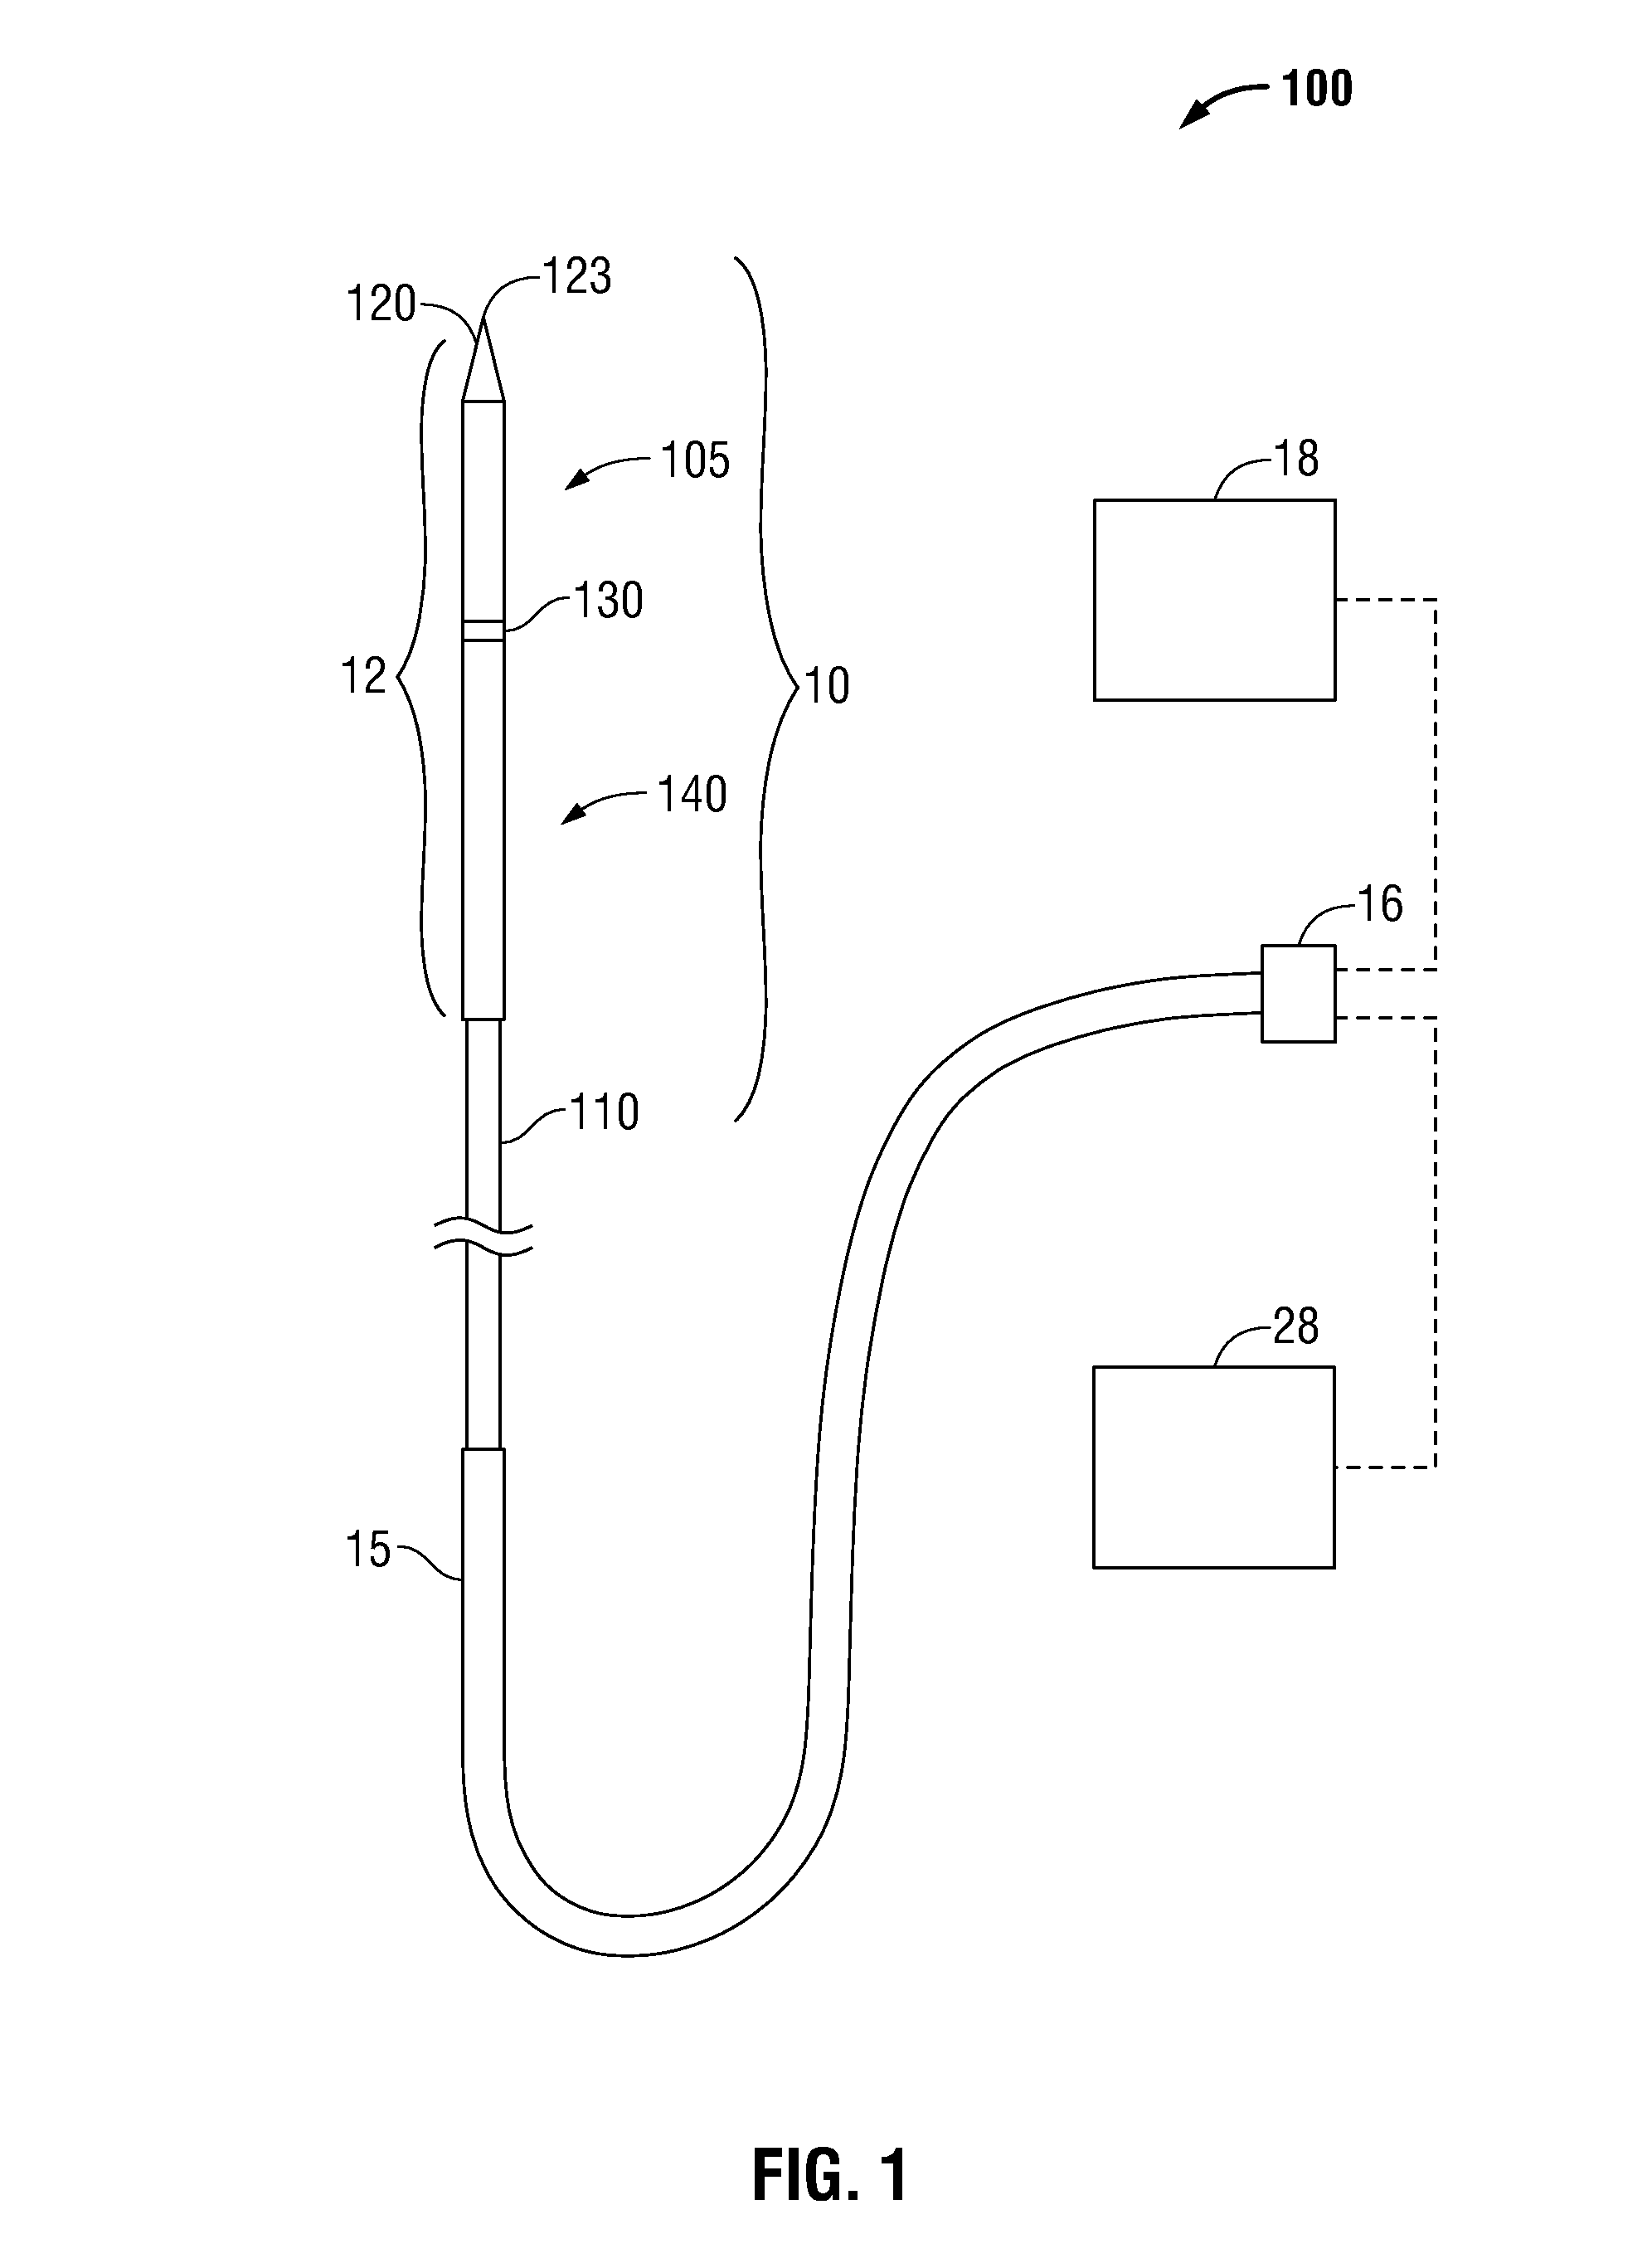 Perfused core dielectrically loaded dipole microwave antenna probe